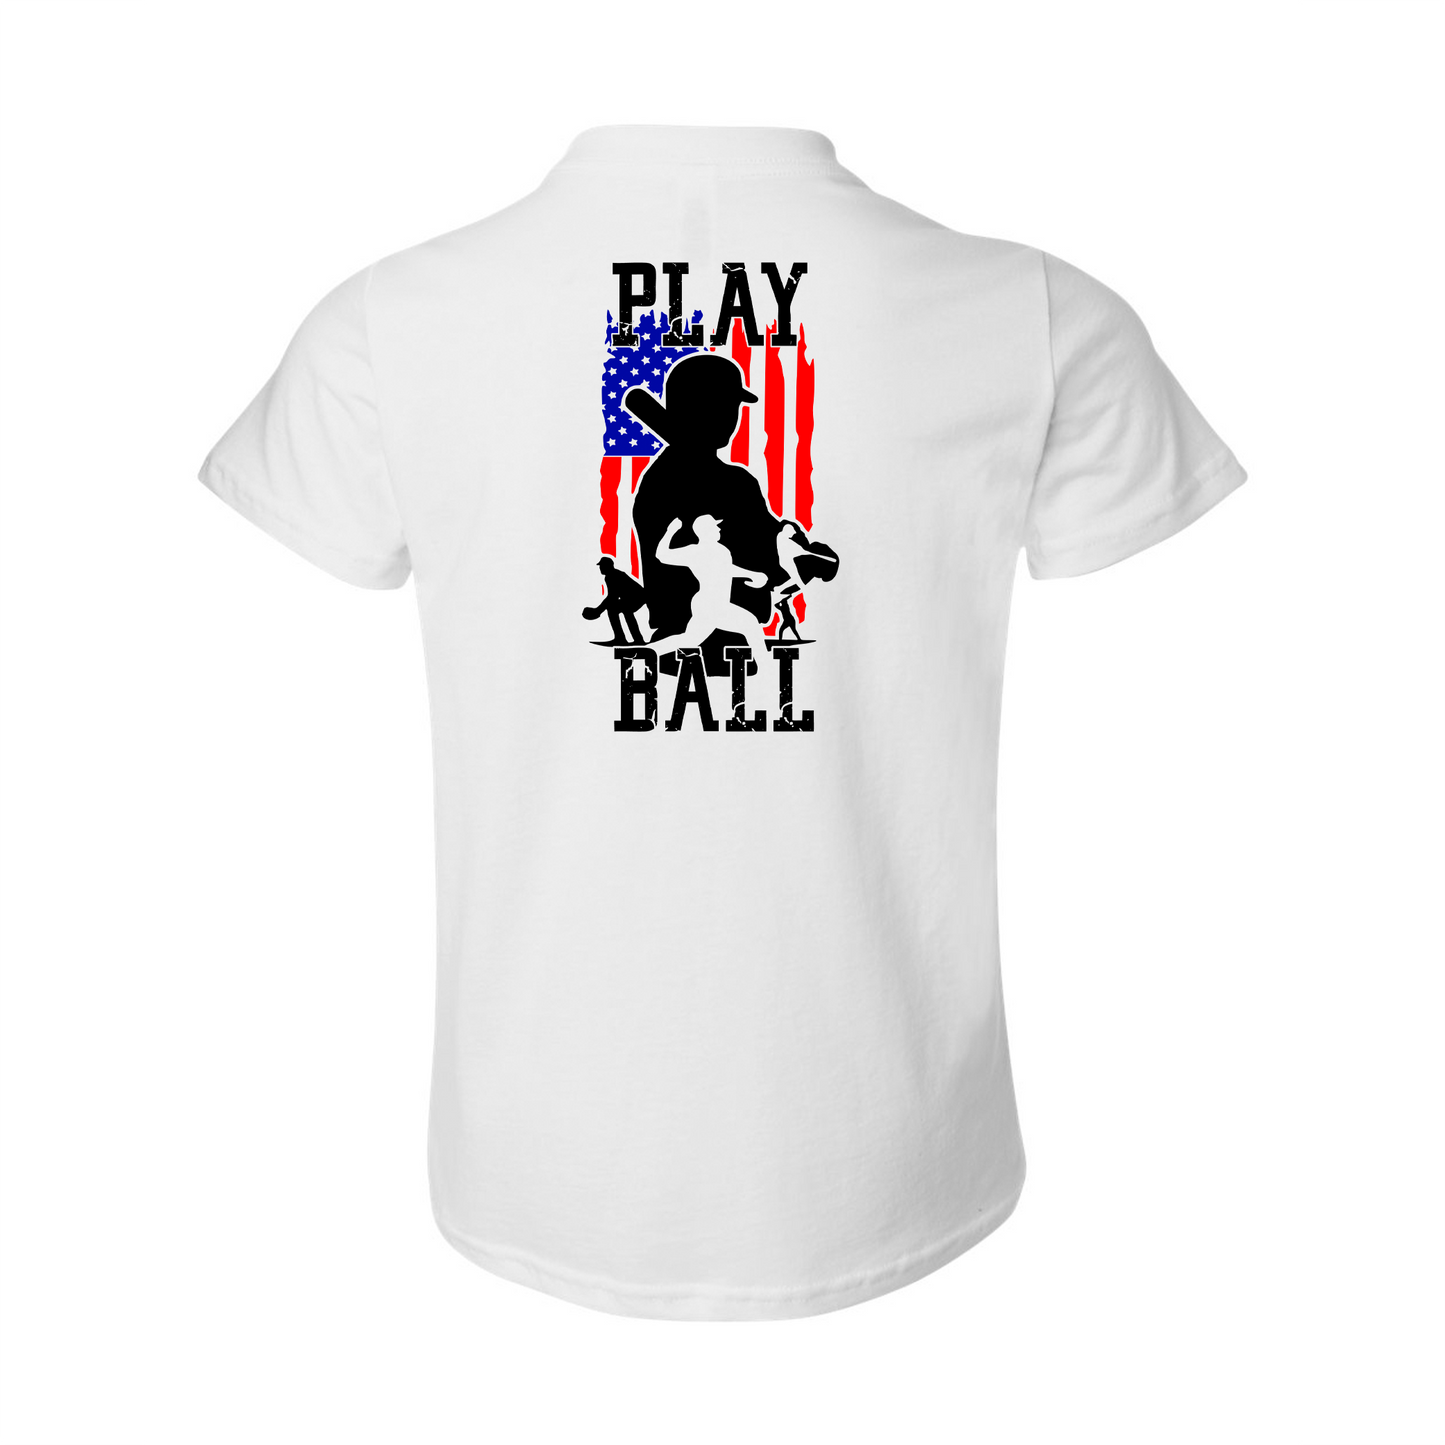 Play Ball! - Youth Cotton Tee